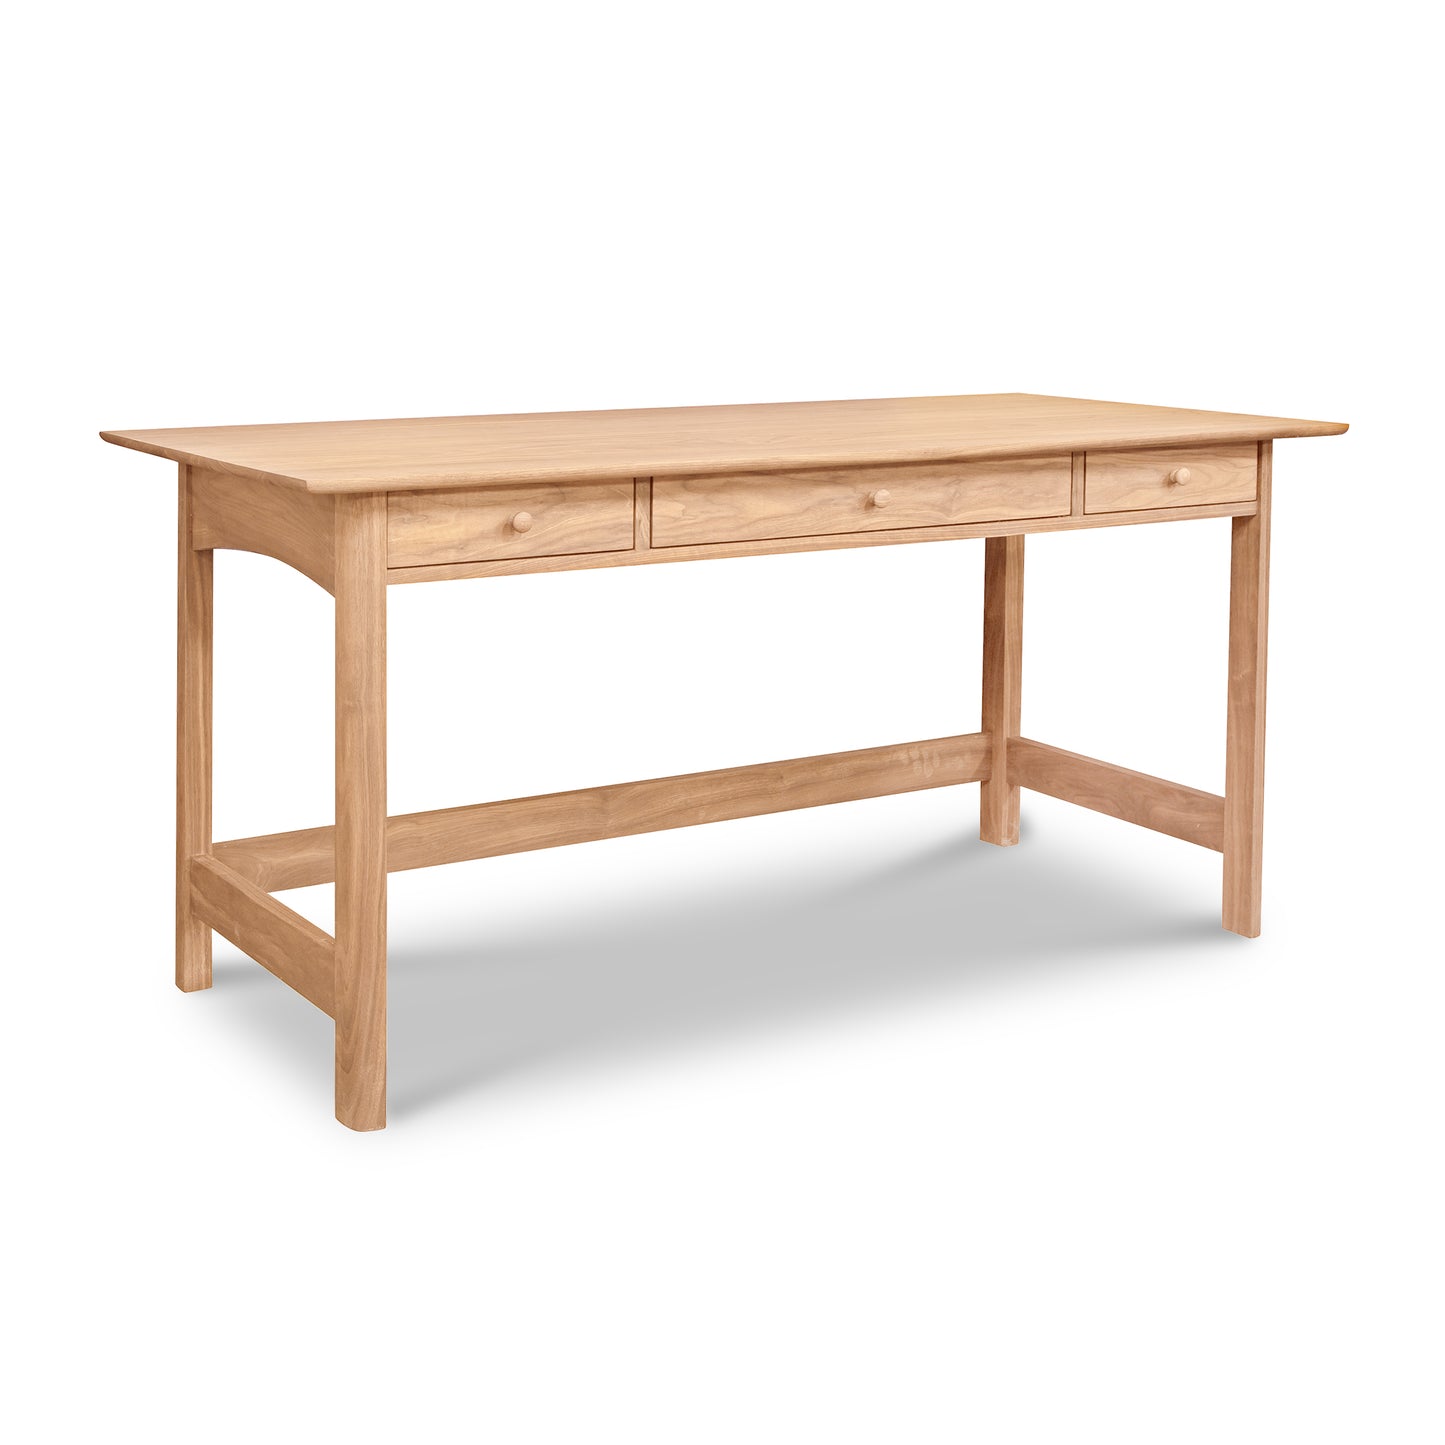 Vermont Furniture Designs Shaker Library Desk, solid wood with two drawers, isolated on a white background.